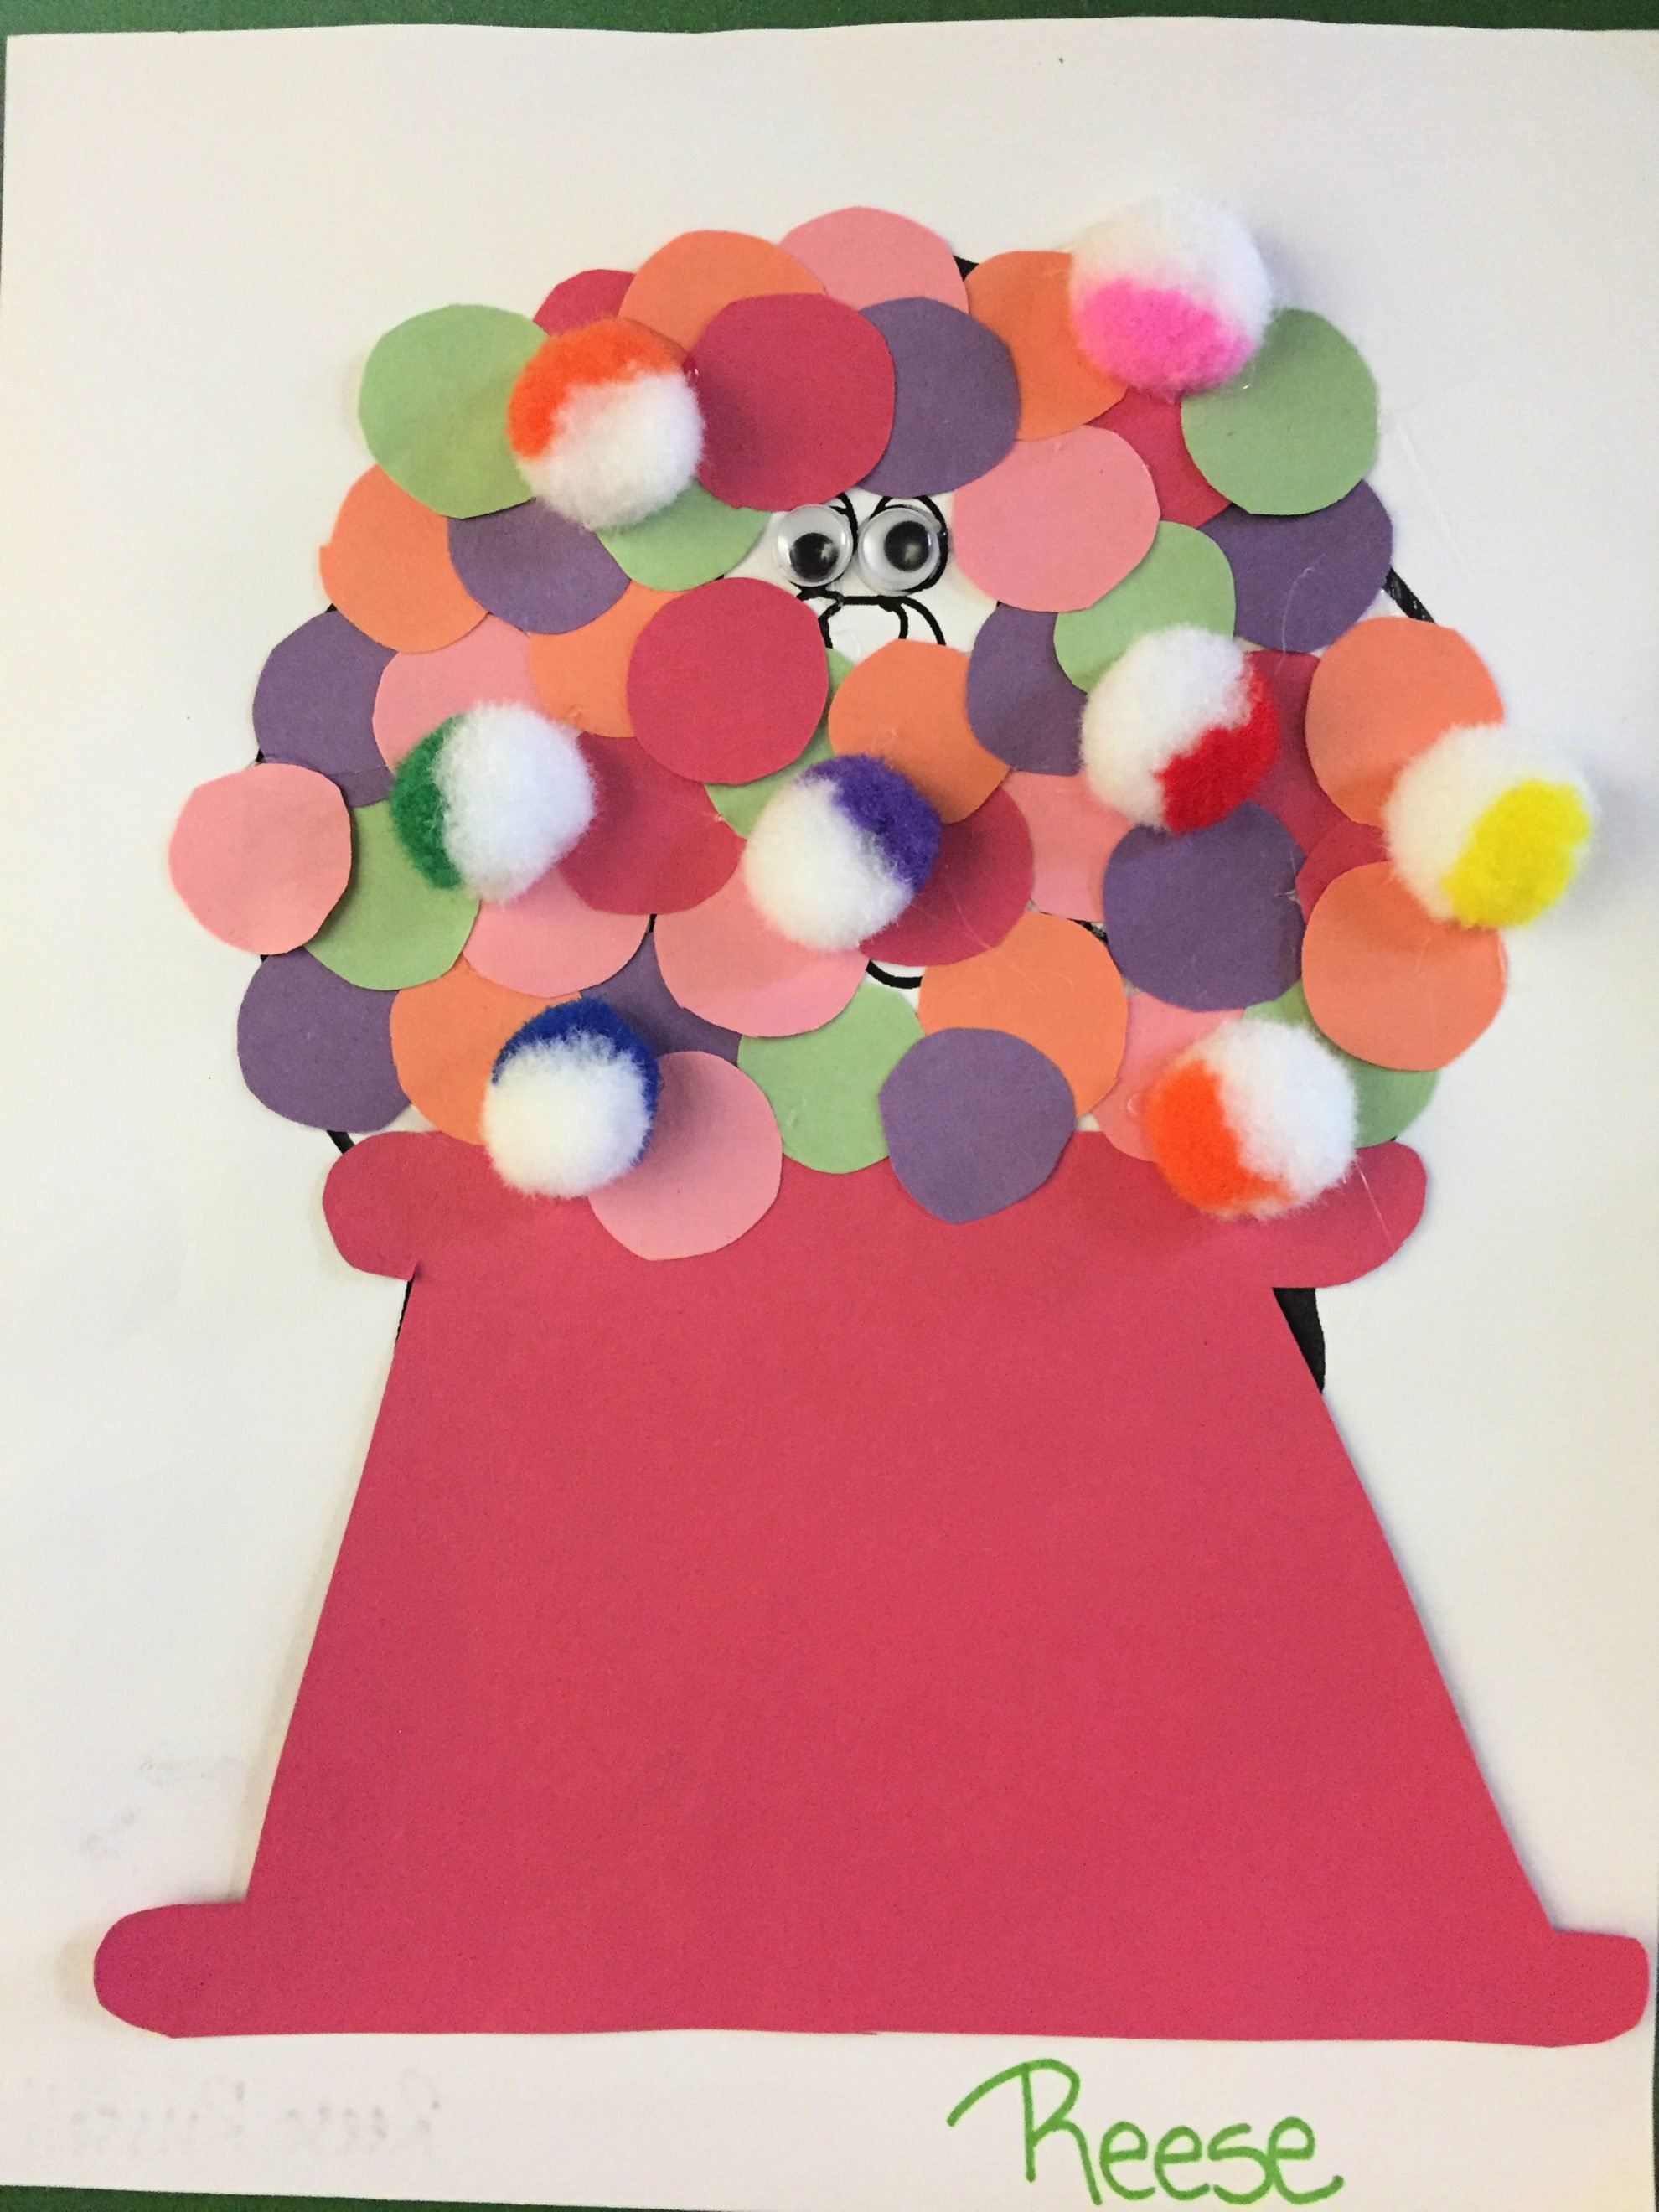 Paper Turkey In Disguise as a Gumball Machine with red construction paper base, round circles as gumballs and some cotton balls dipped in colors.